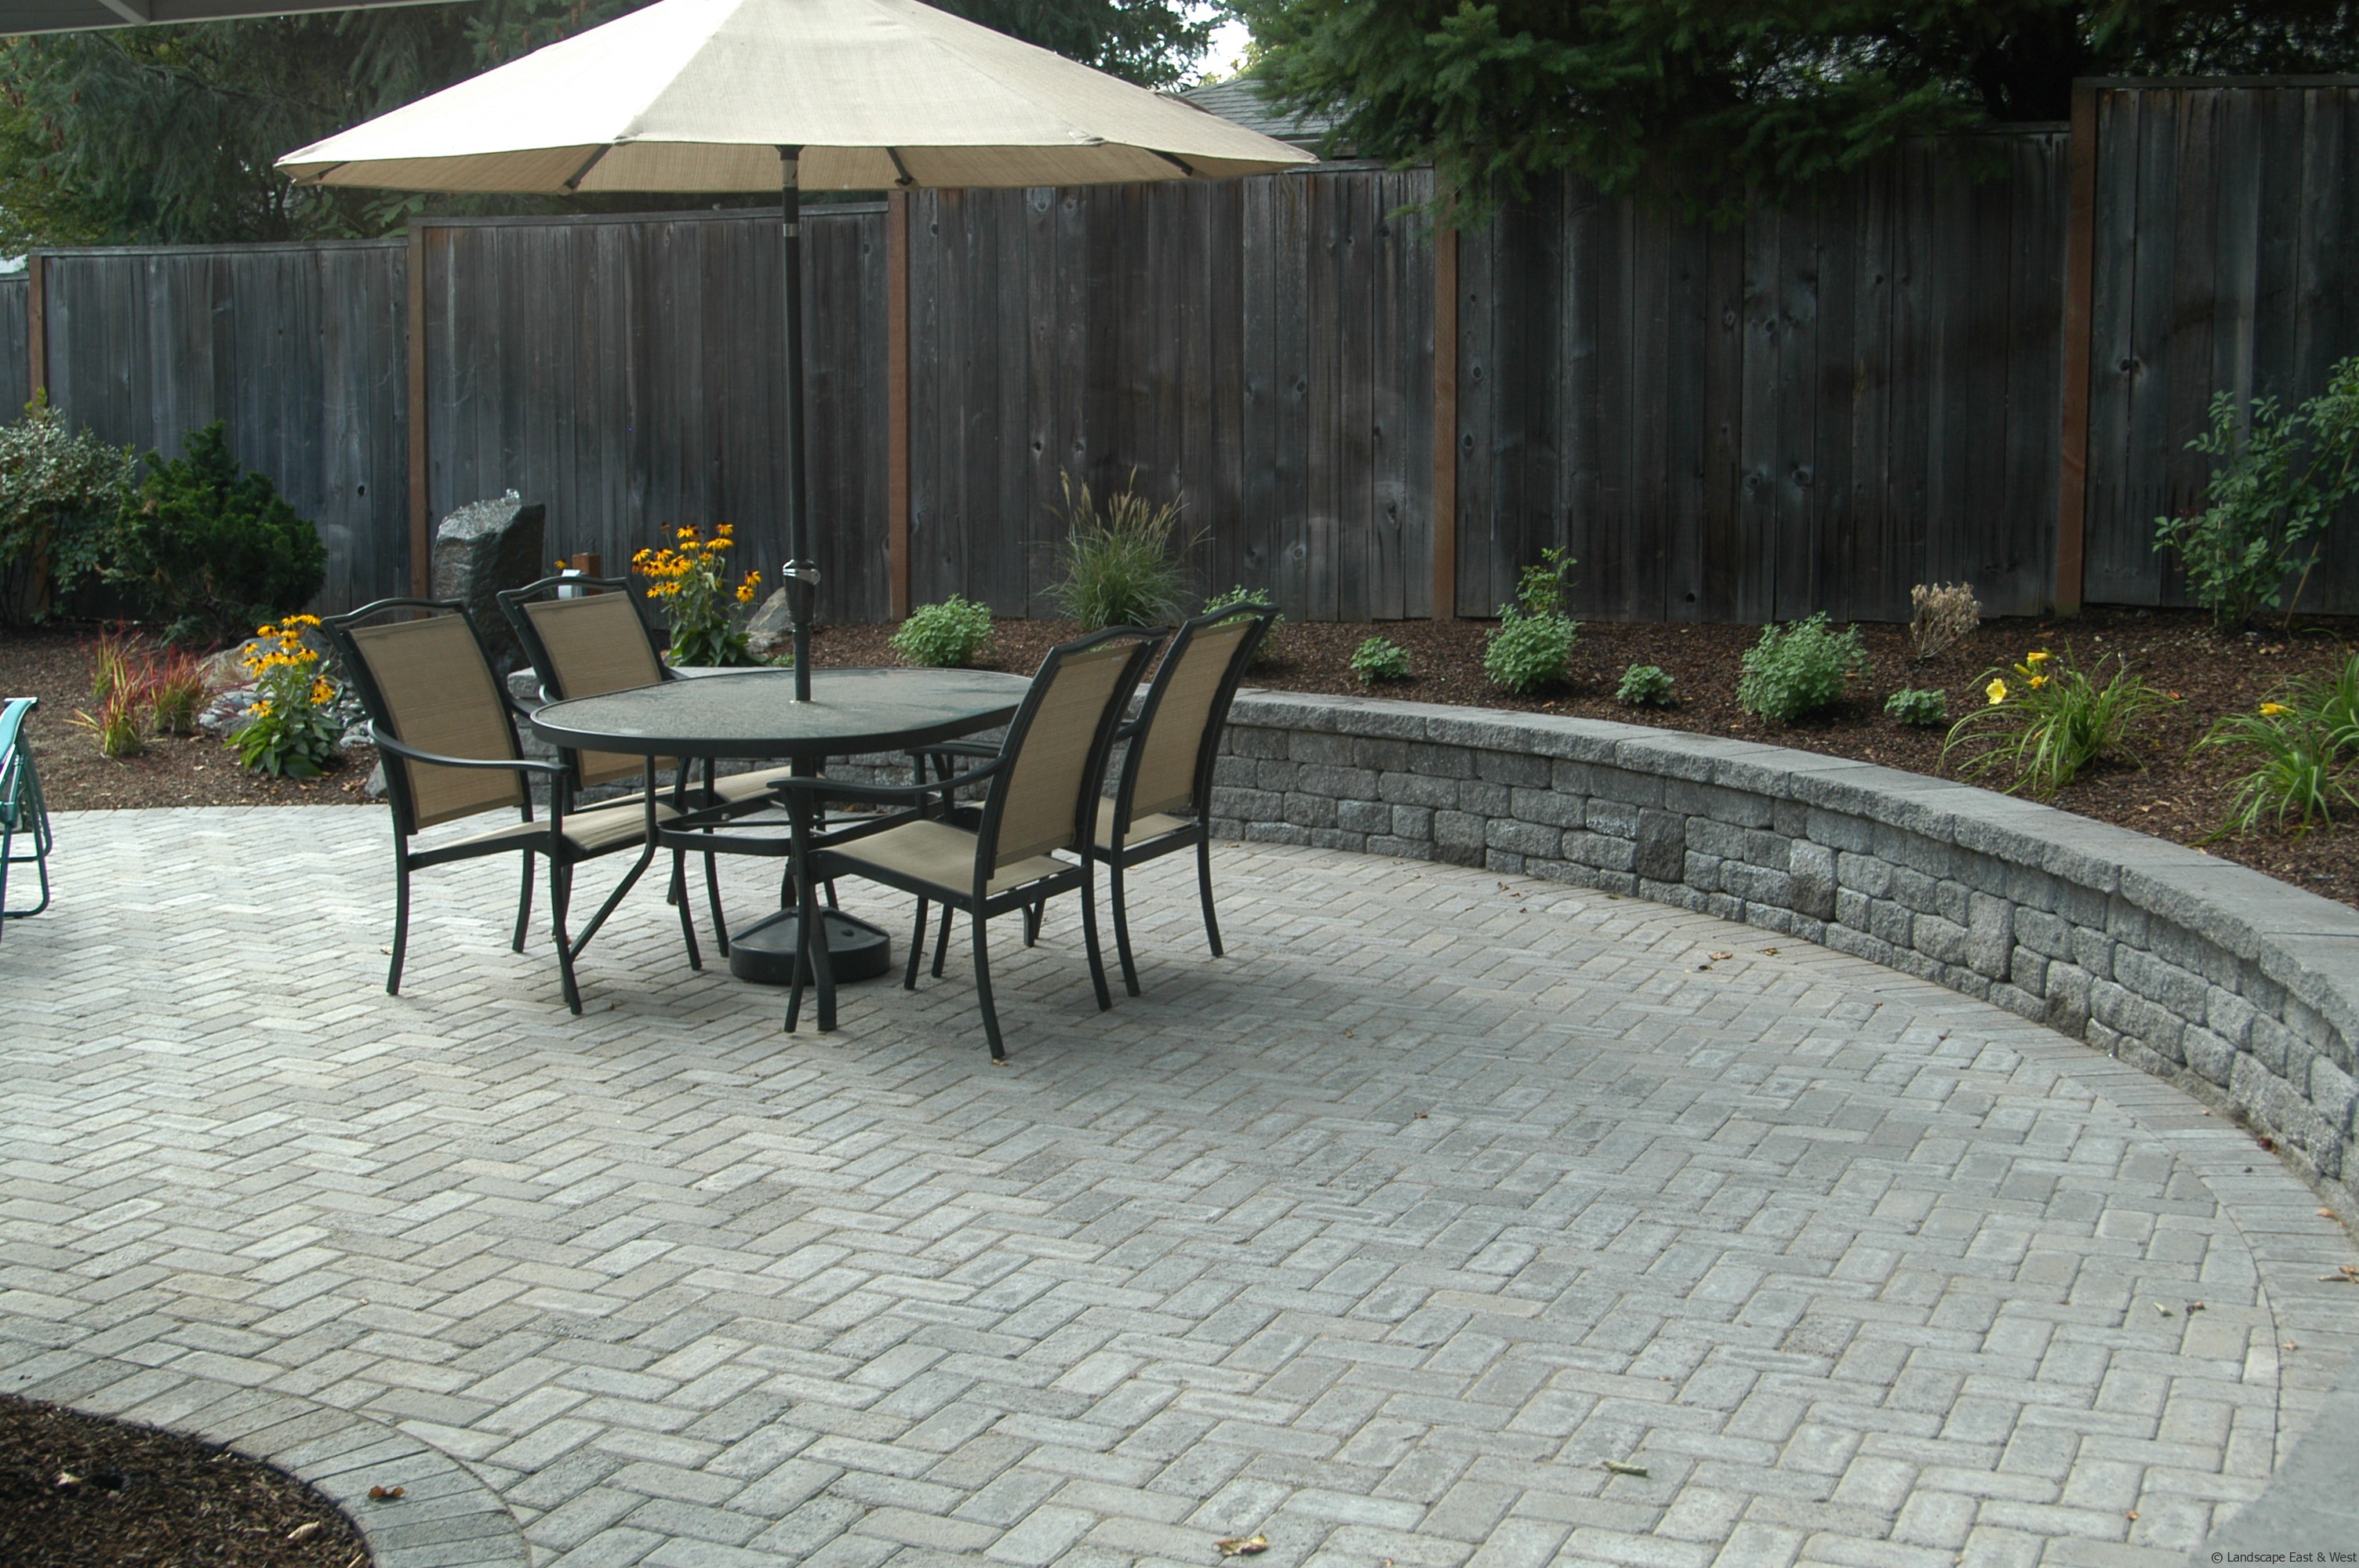 5 Ways to Improve Patio Designs for Portland Landscaping by Christin Bryk | Portland Landscaping ...